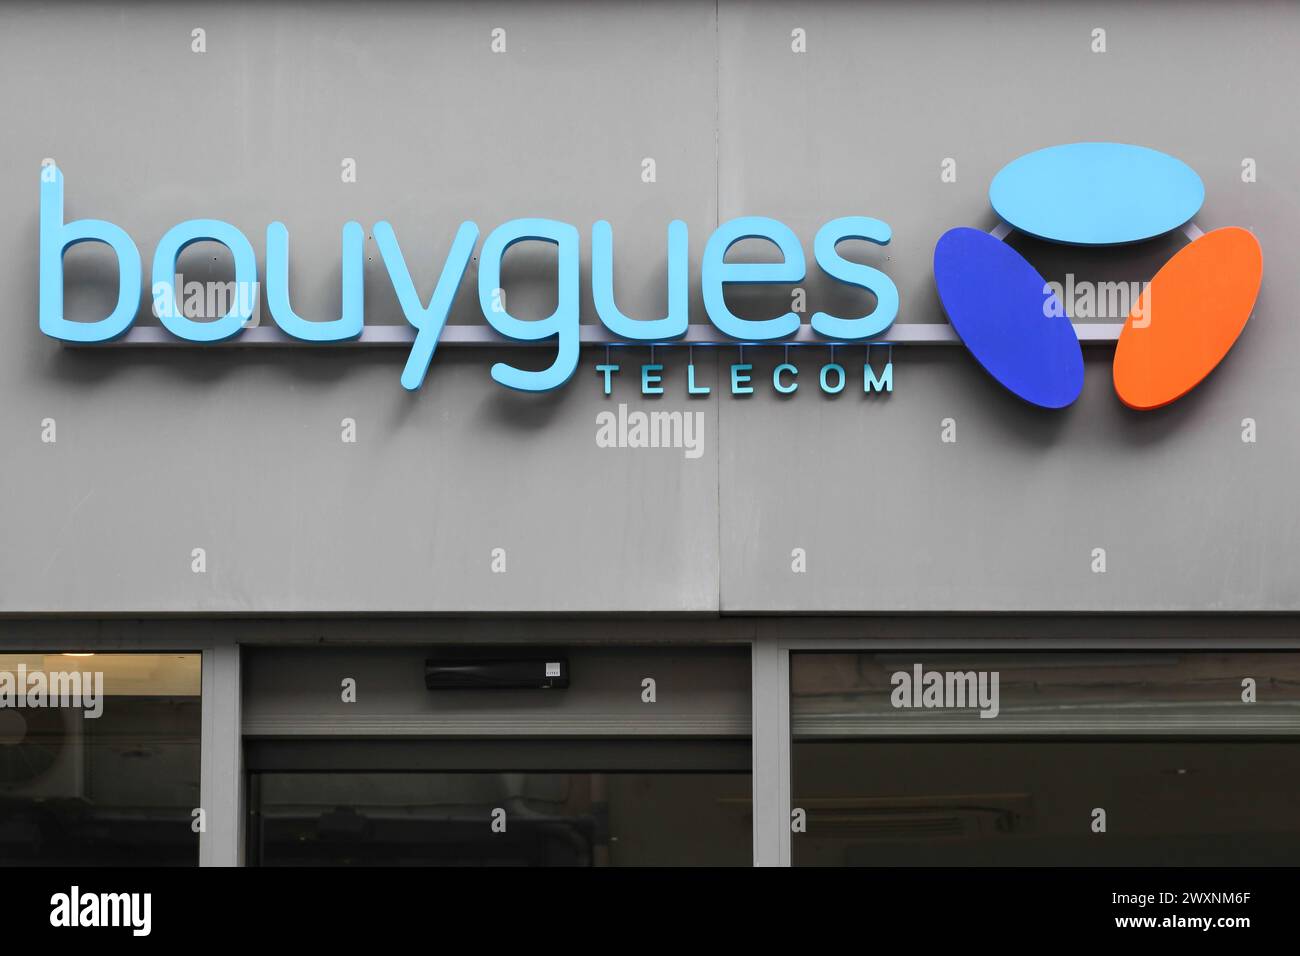 Voiron, France - June 1, 2018: Bouygues Telecom logo on wall of a store. Bouygues Telecom is a French mobile phone and Internet provider company Stock Photo